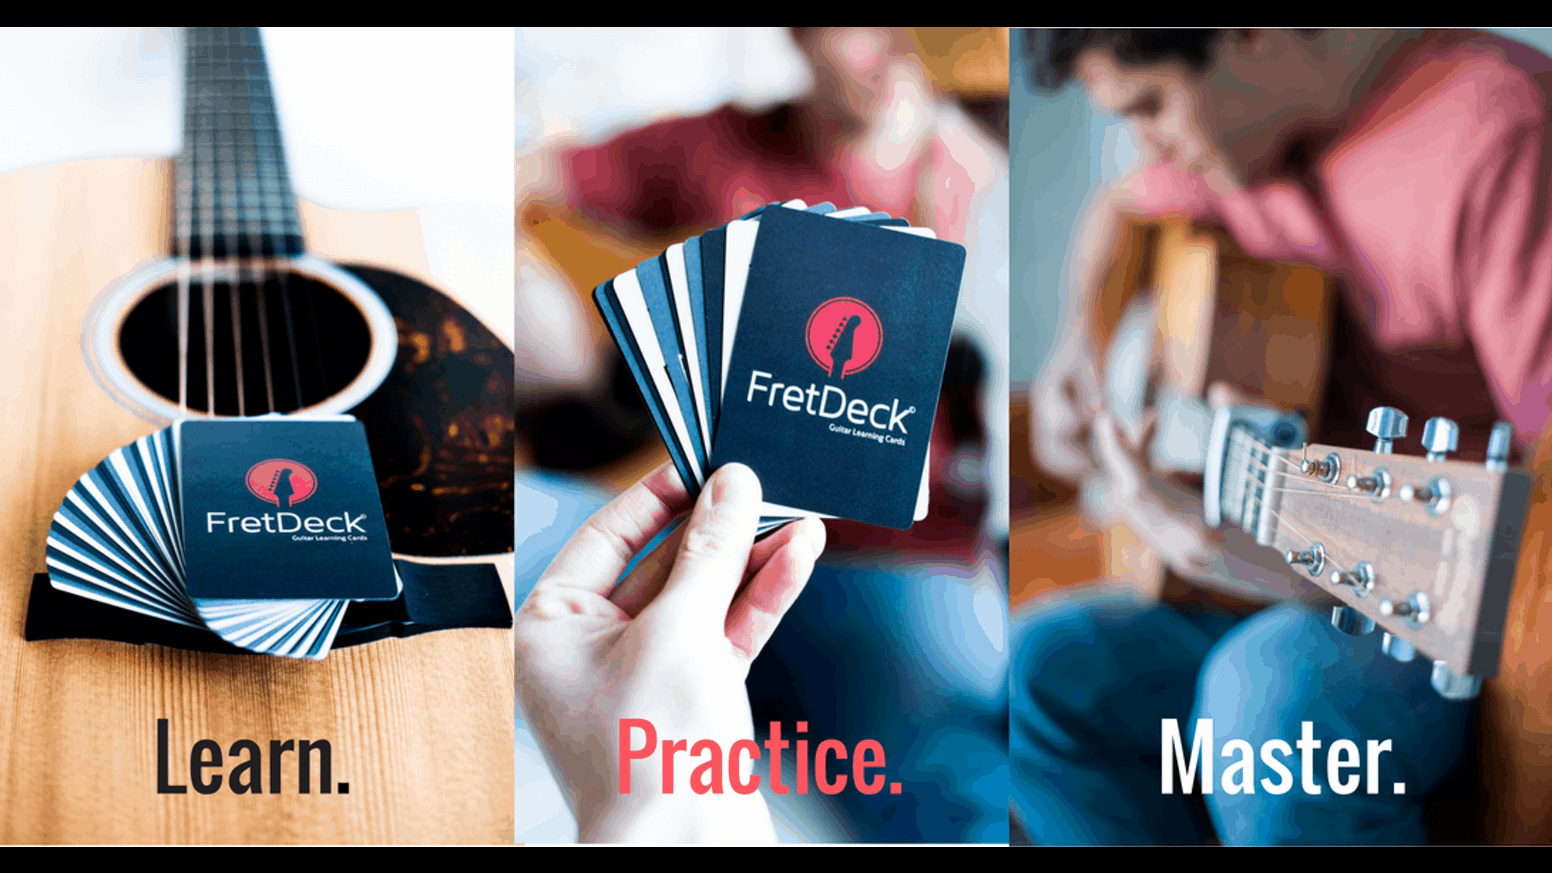 Learning Cards: Learn,Practice,Master 